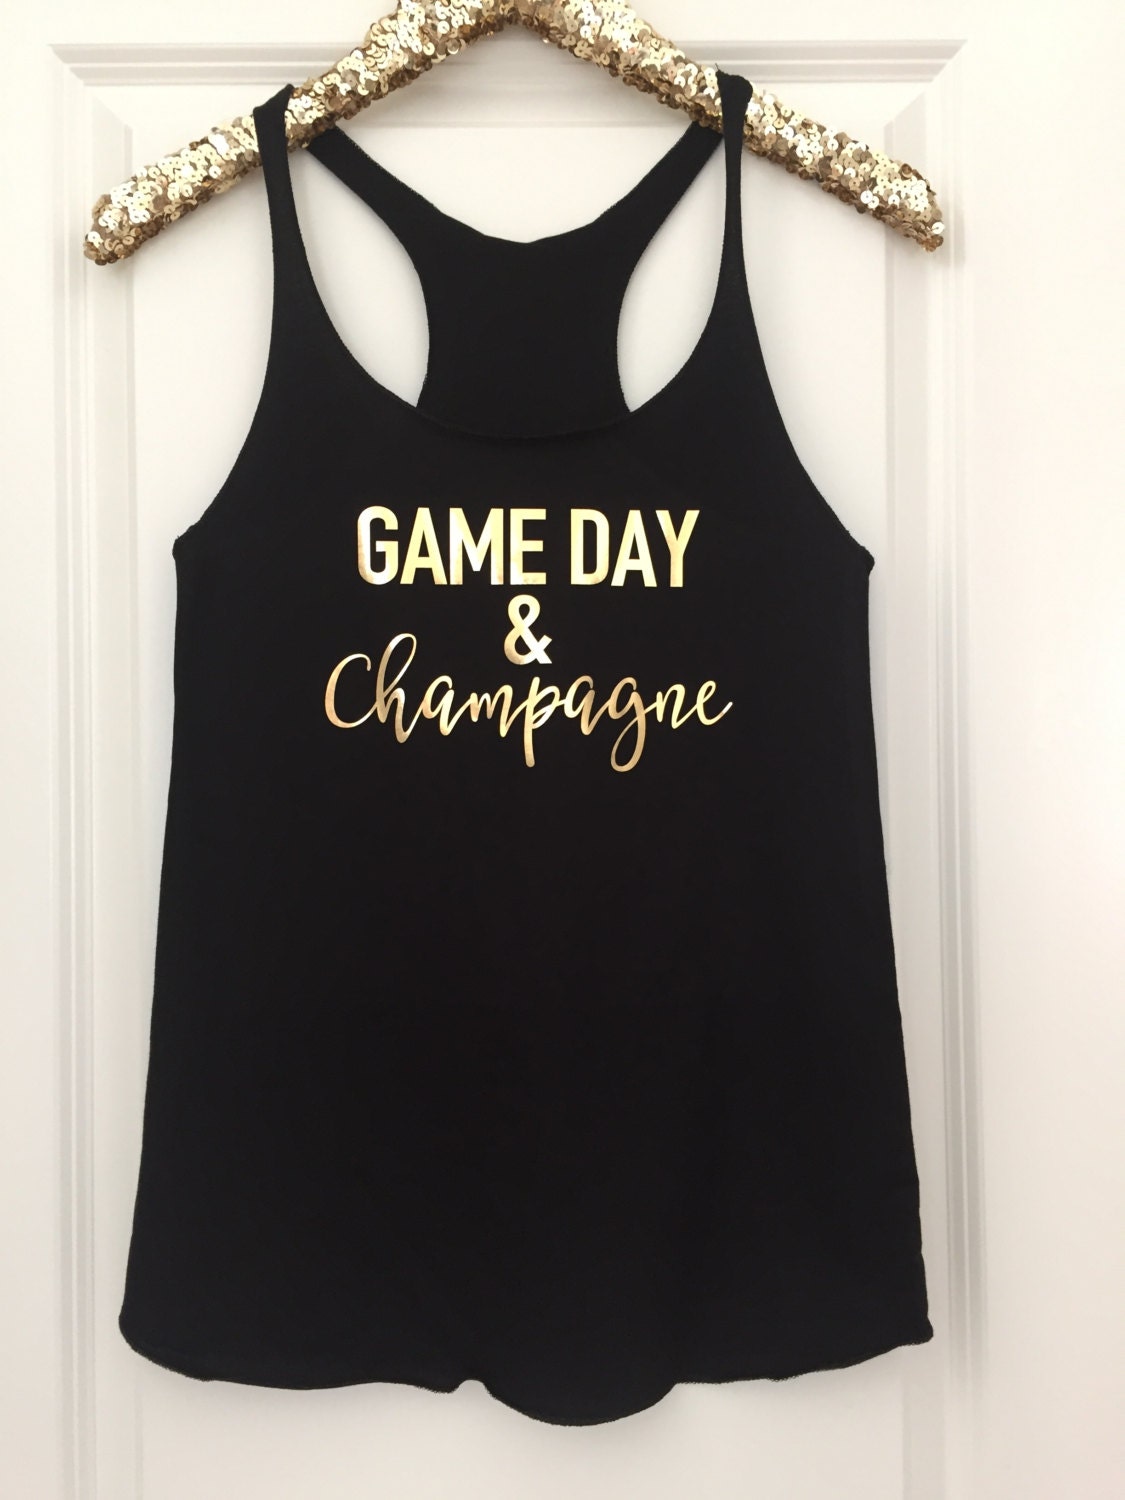 Bridesmaid Game Day & Champagne Racerback Tank Tops // Bachelorette Party Tank Tops, Bachelorette Party, Bachelorette Party Shirts / 6001